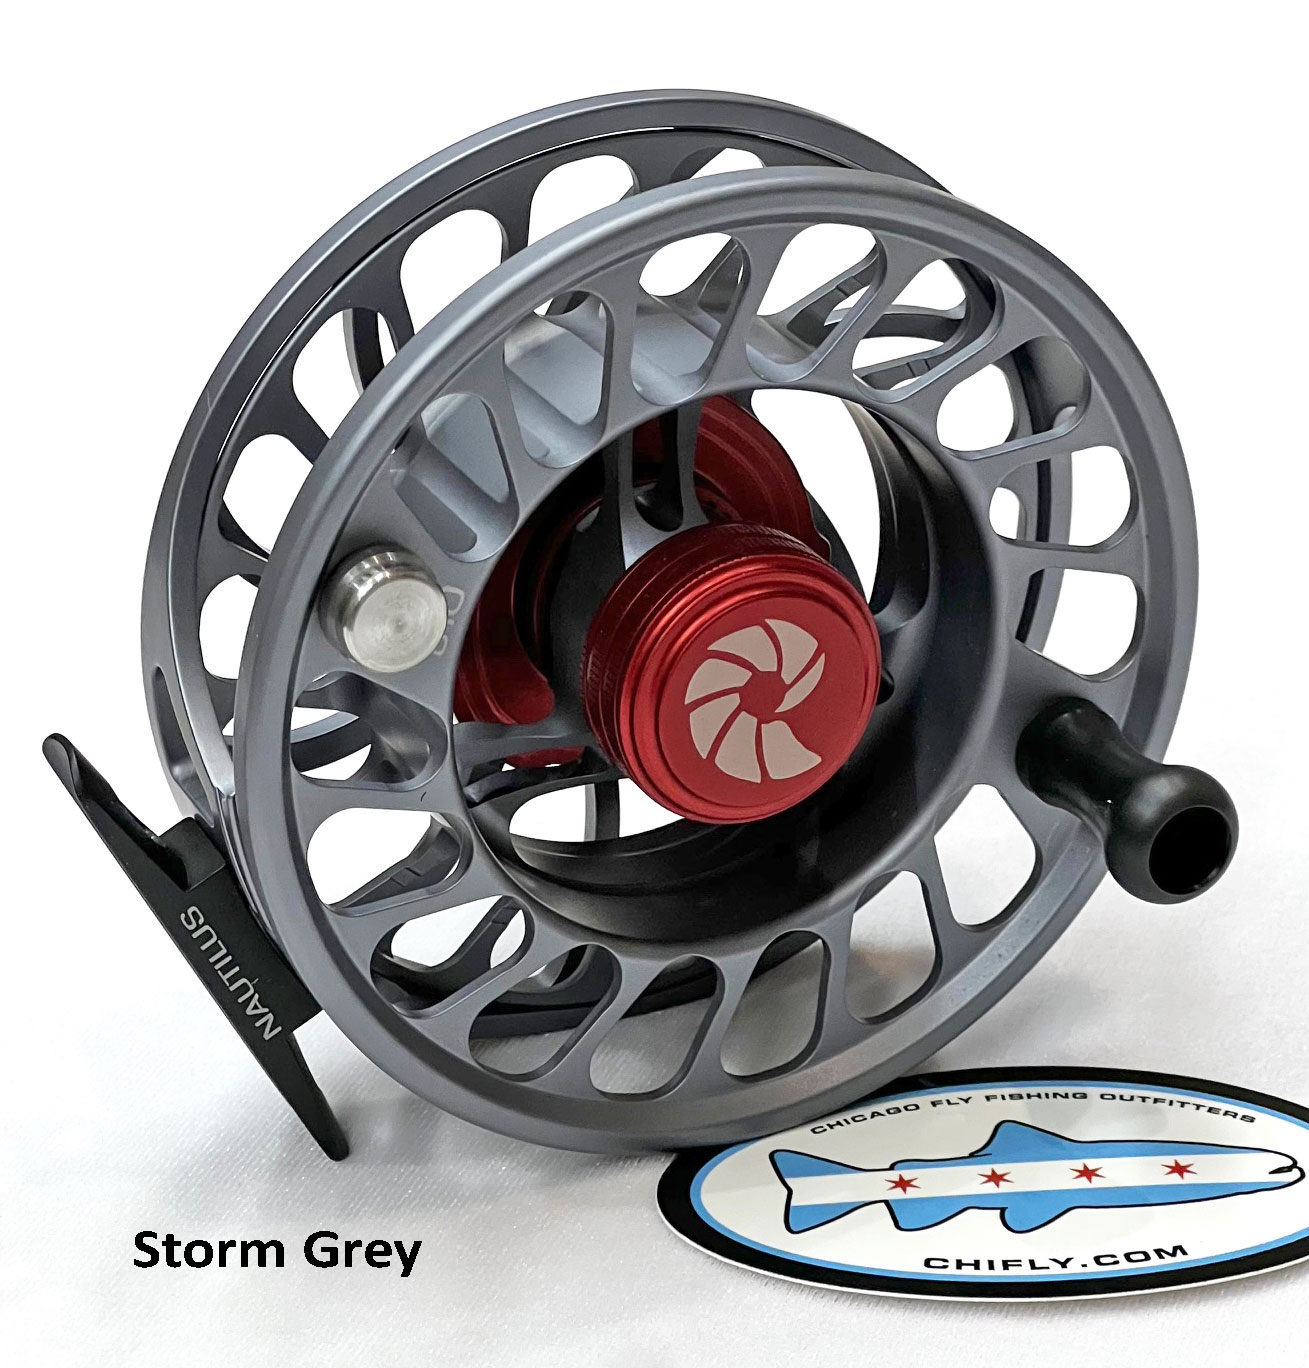 Nautilus CCF-X2 and Silver King Reels - Fly Reels & Spare Spools - Chicago  Fly Fishing Outfitters